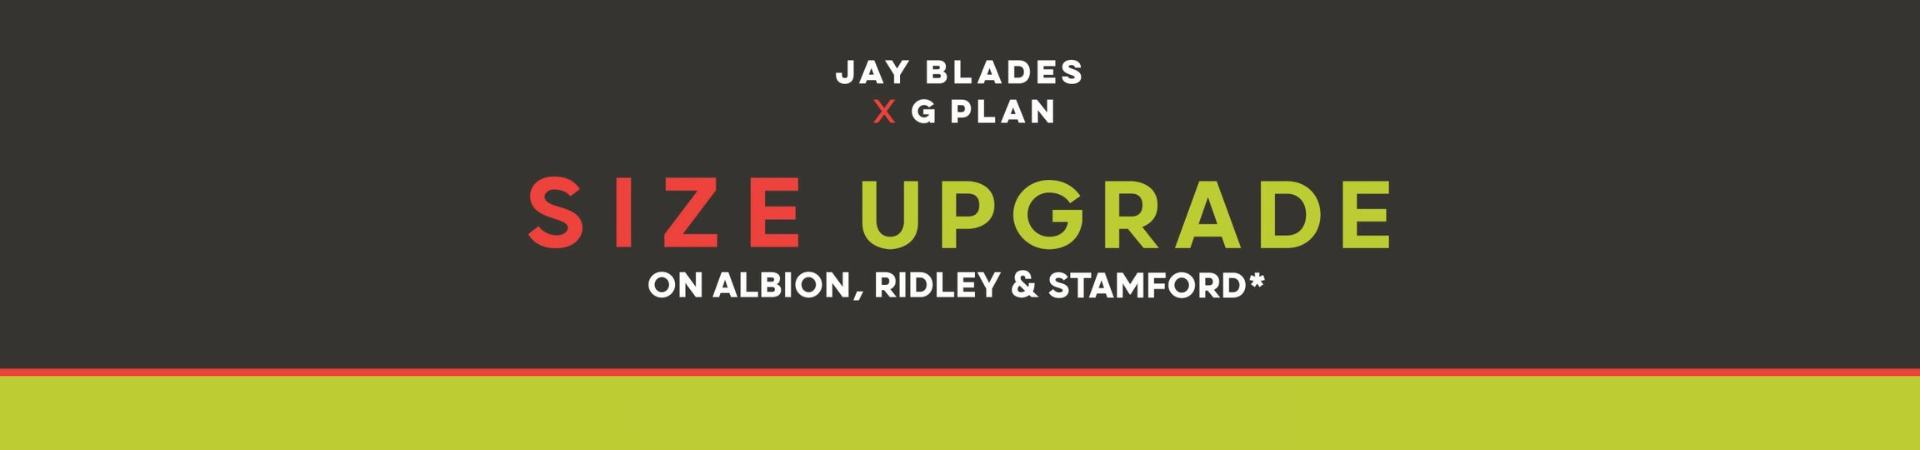 Jay Blades Size Upgrade Collections Banner